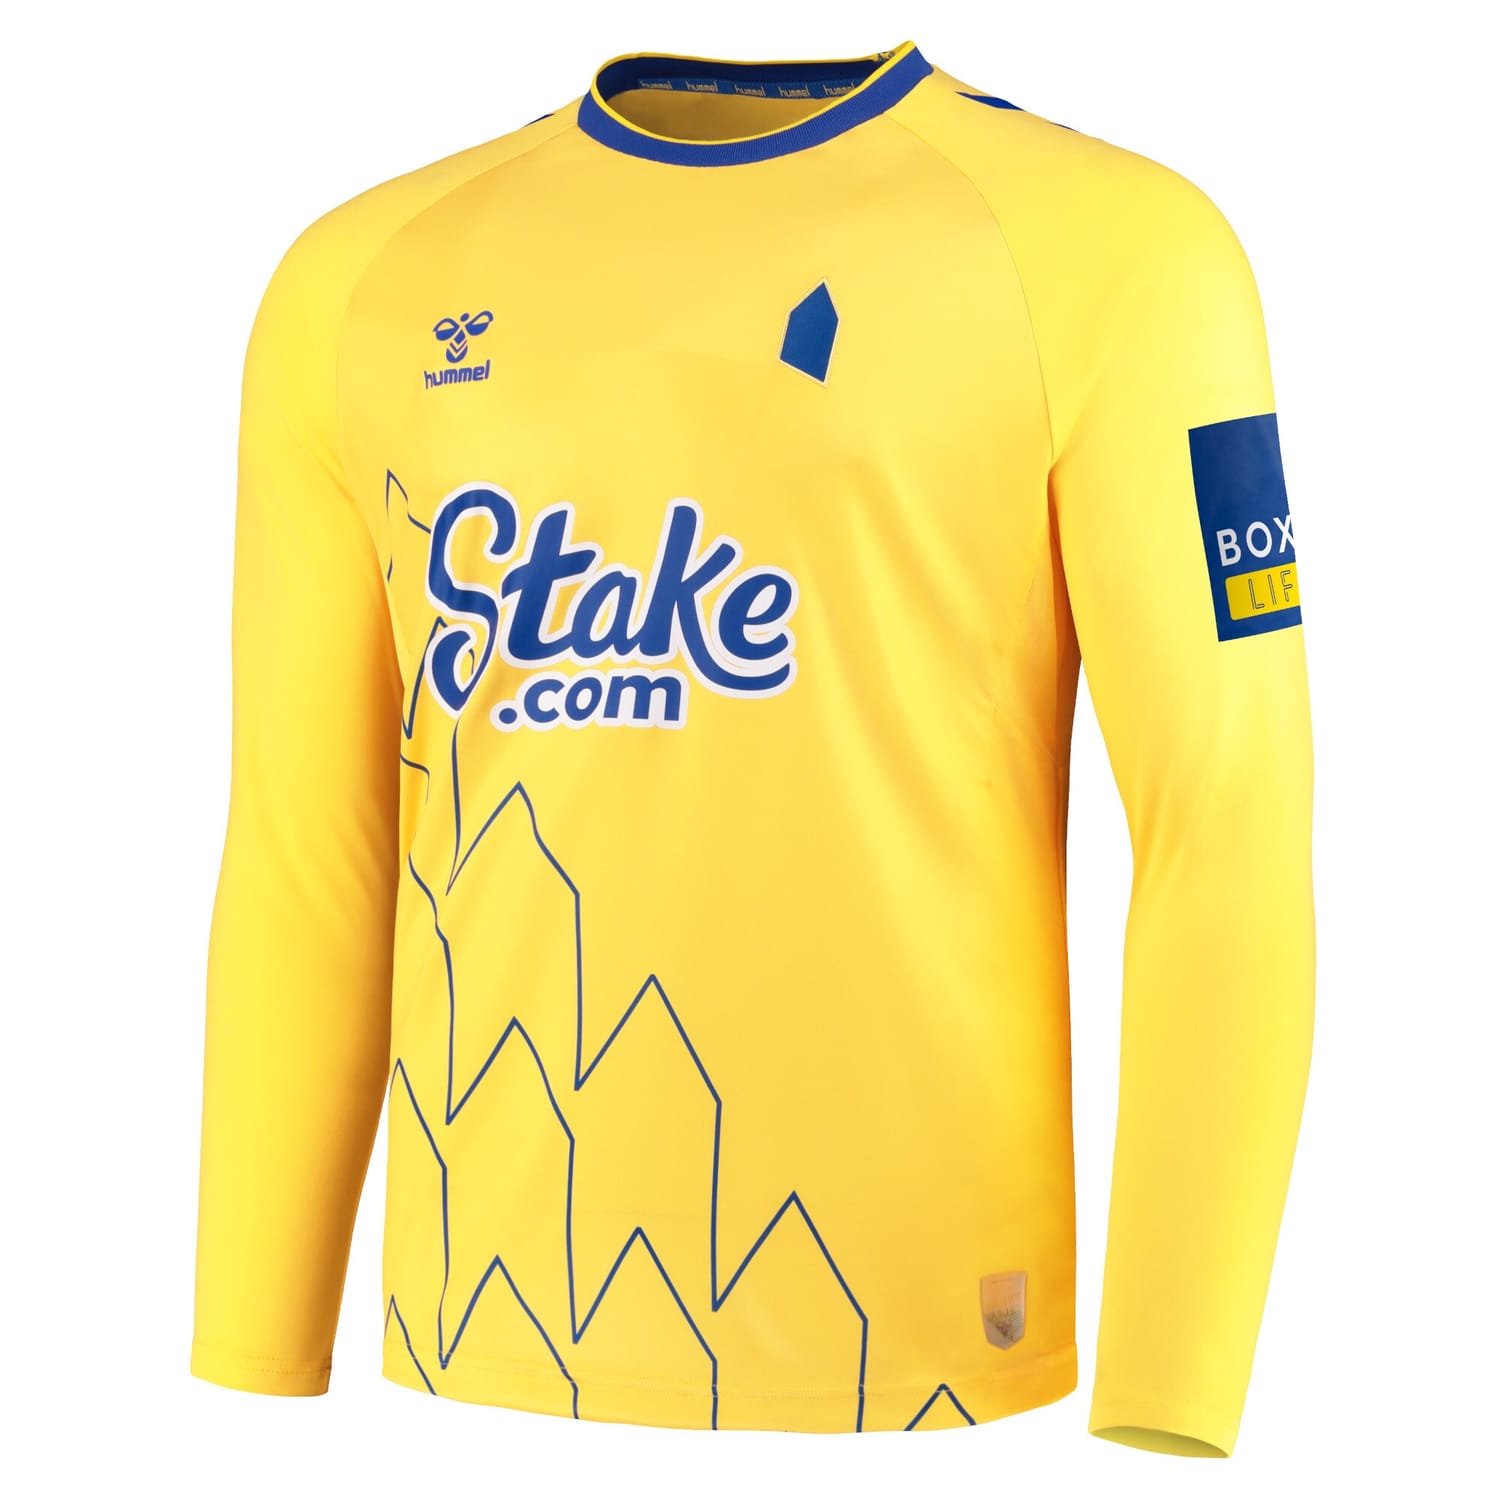 Premier League Everton Third Jersey Shirt Long Sleeve 2022-23 player Conor Coady 30 printing for Men